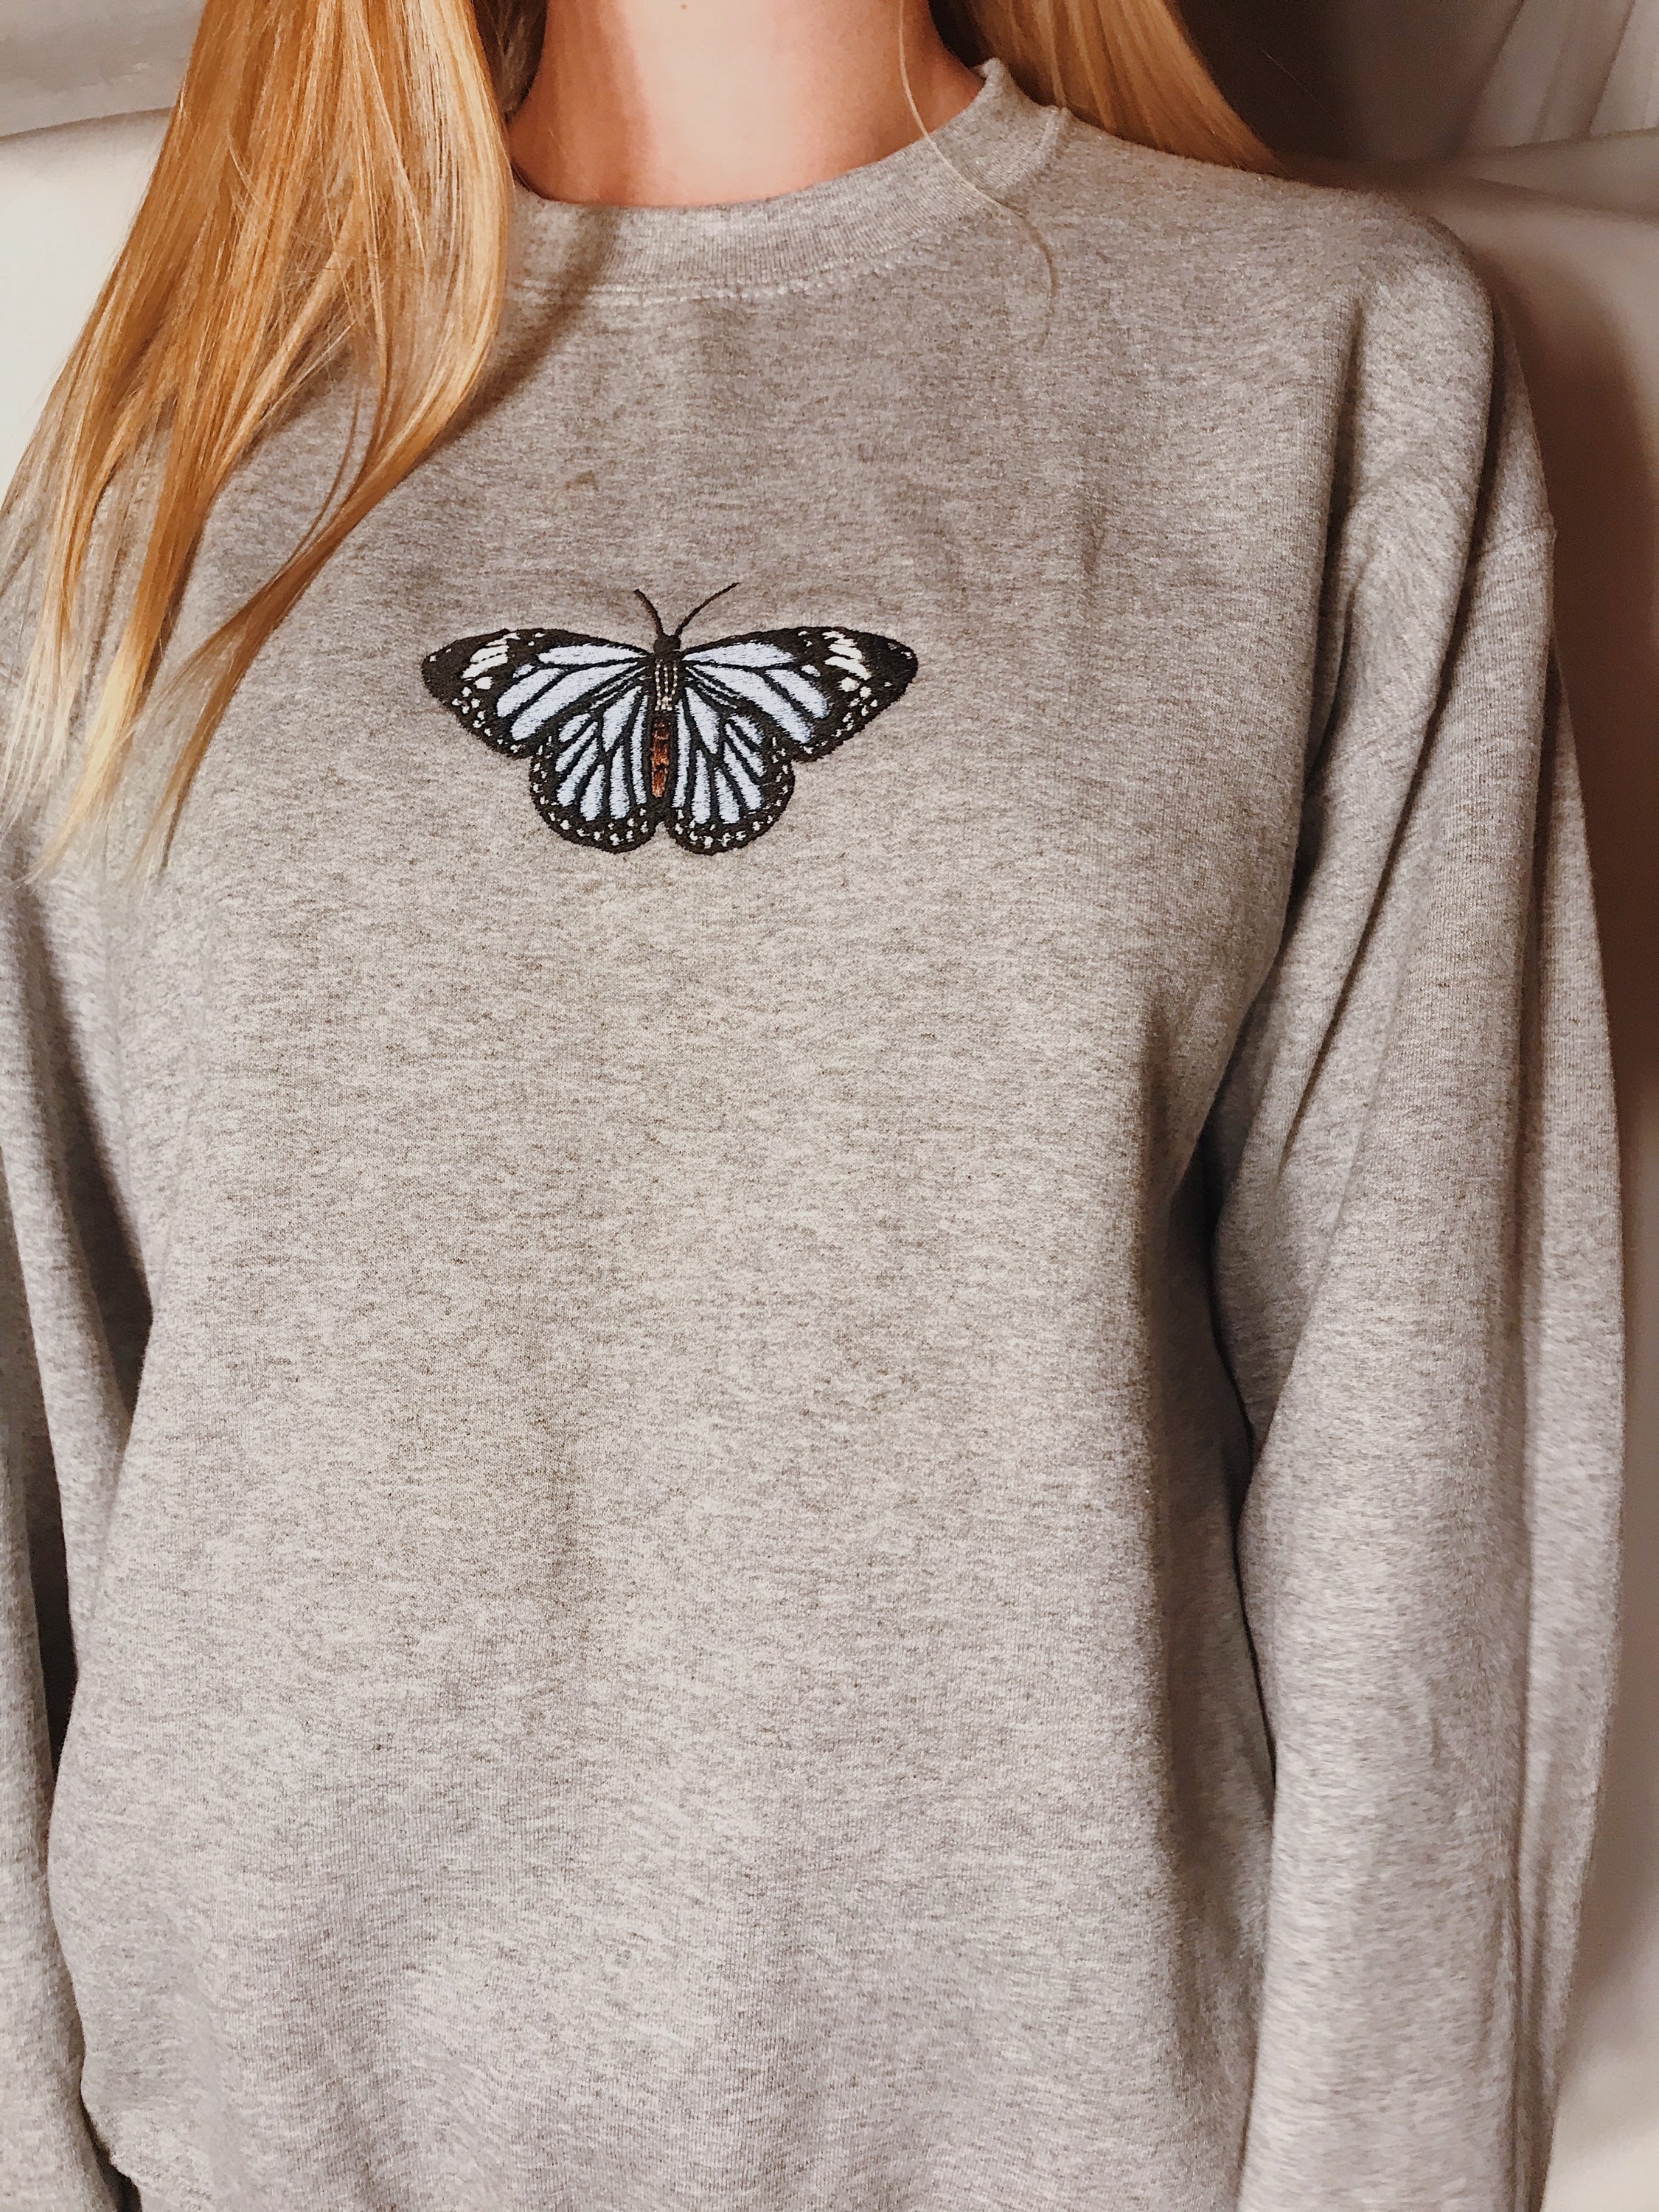 Embroidered Butterfly Sweatshirt | Etsy